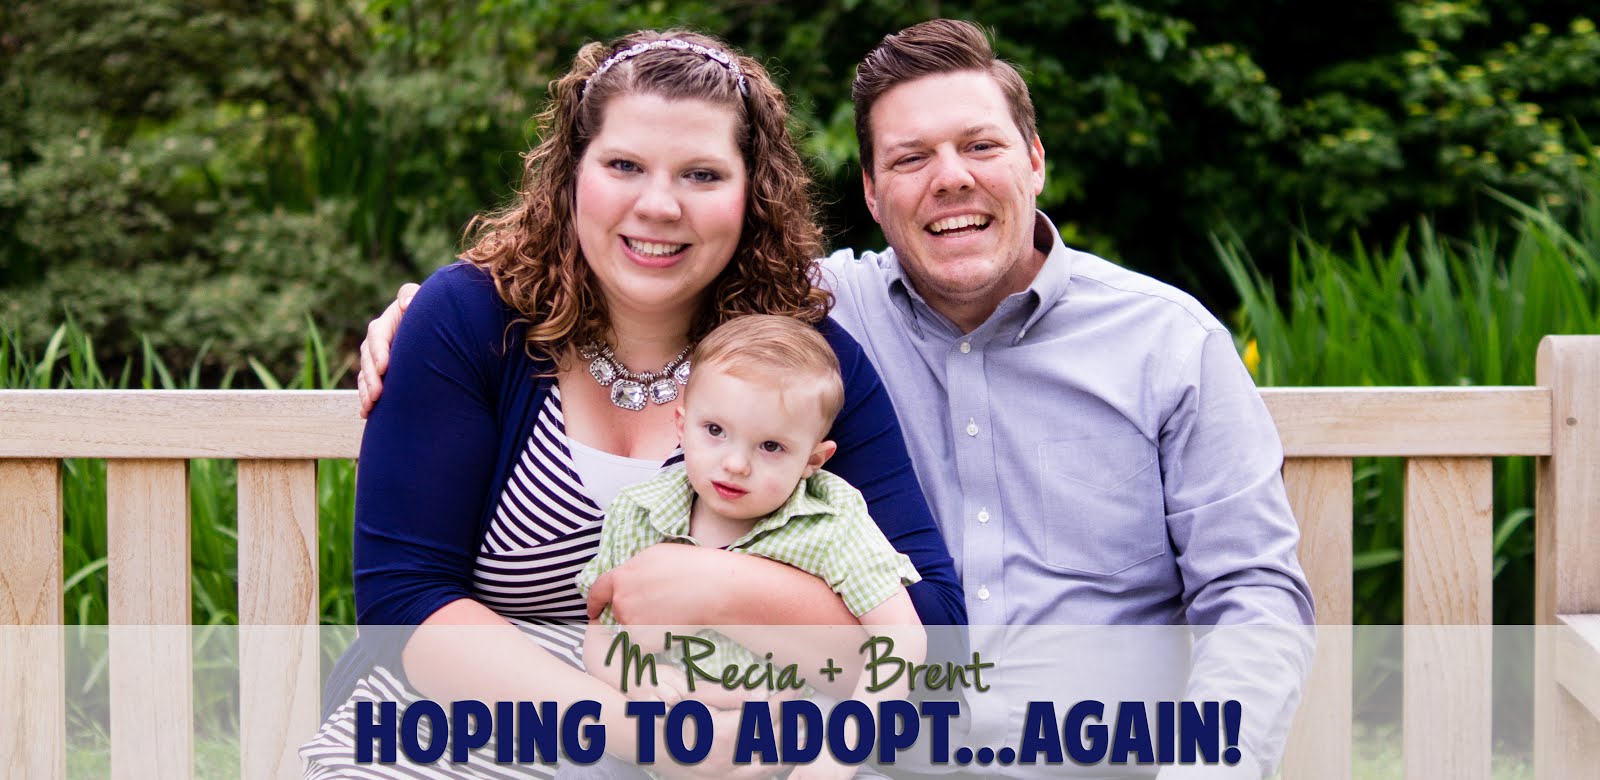 We're hoping to adopt...again!